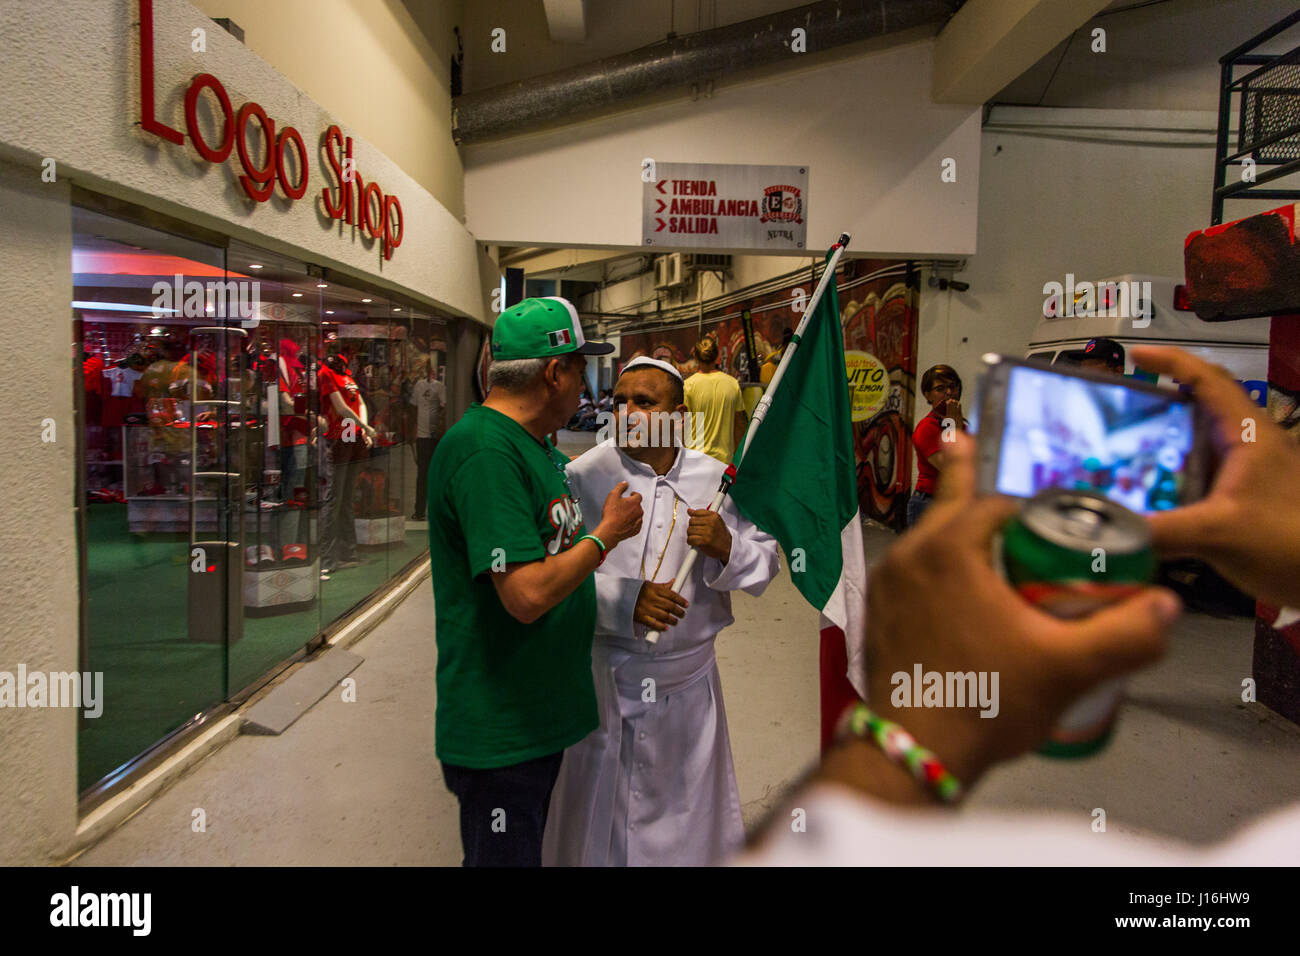 A Man Dressed As A Priest Holding A Mexican Flag In A Stadium Hallway In The Dominican Republic Stock Photo